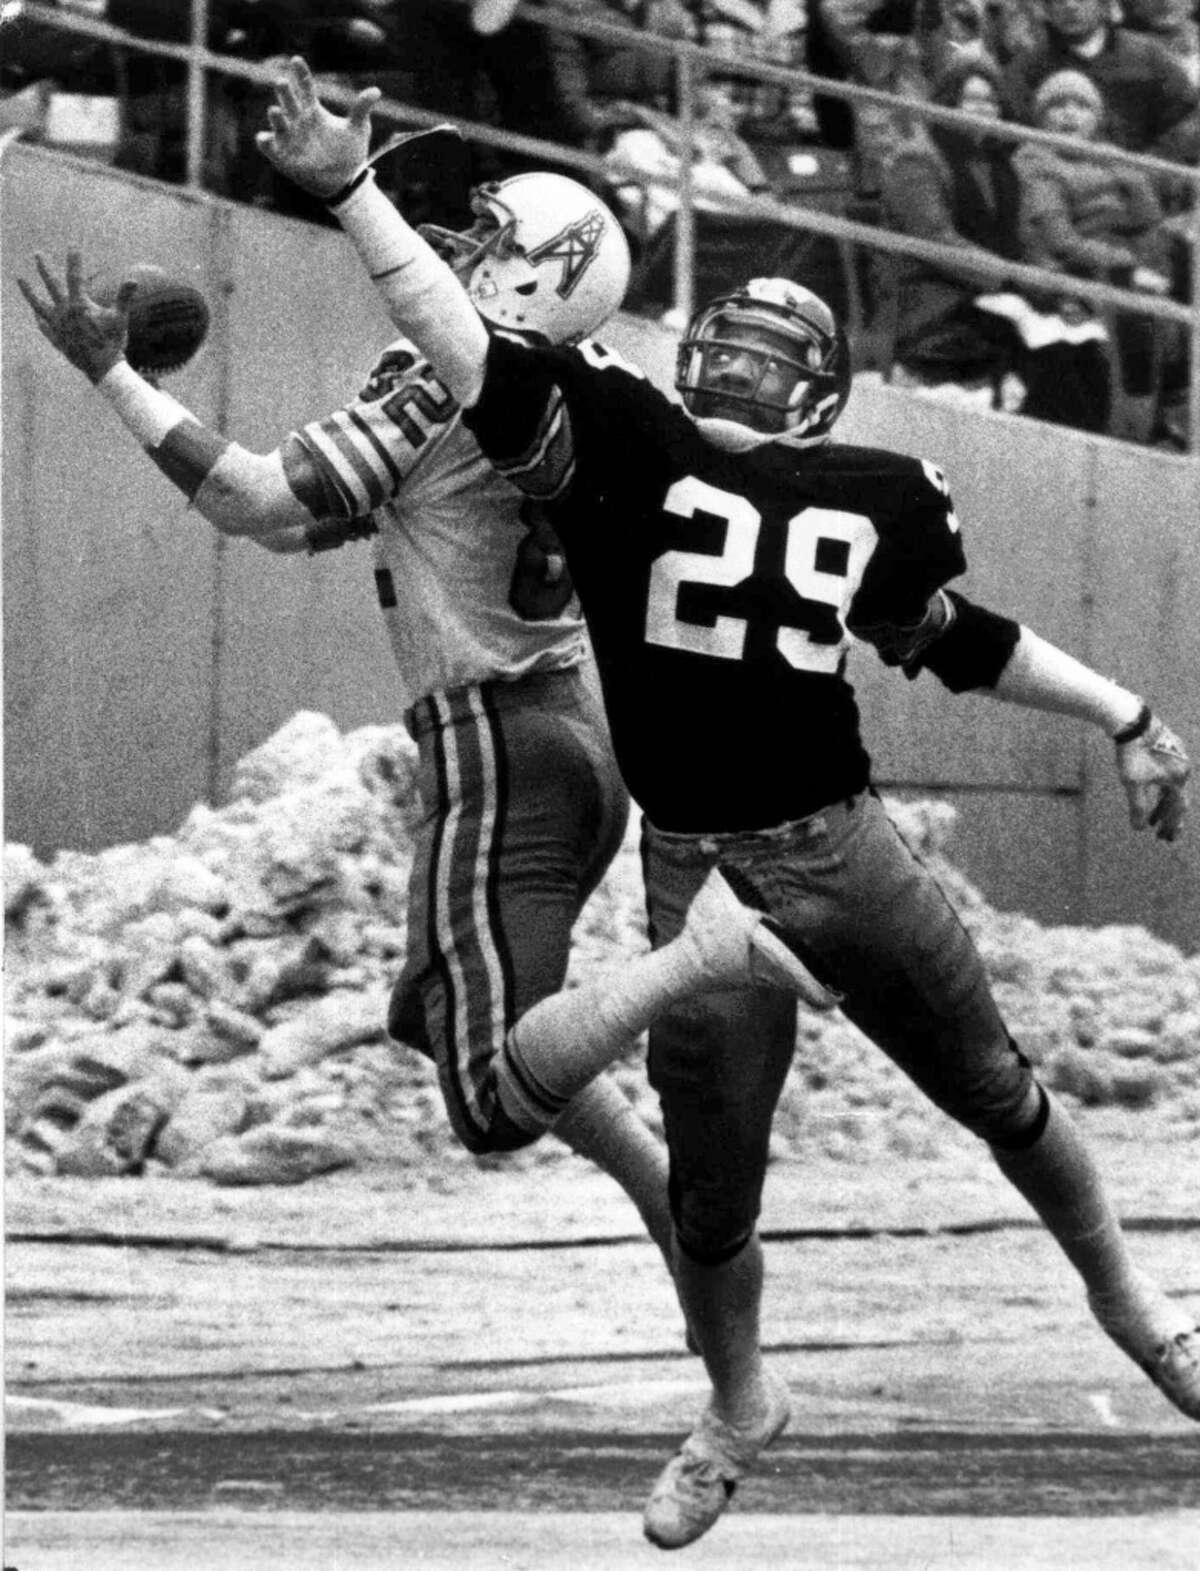 Mike Renfro's non-catchWhen: 1979 AFC championship at Pittsburgh The call: With the Oilers trailing 17-10 late in the third quarter, Renfro appeared to catch Dan Pastorini's pass in the back right corner of the end zone and come down in bounds for the apparent tying touchdown. Replays seemed to back that up, but the officials ruled Renfro didn't have control of the ball before going out of bounds. The Oilers had to settle for a field goal. The impact: Instead of being tied, the Oilers trailed by four and the Steelers added 10 points in the fourth quarter to seal their Super Bowl berth. Oilers players and fans to this day maintain Renfro caught the ball in bounds, and it's safe to say the game might've played out differently.